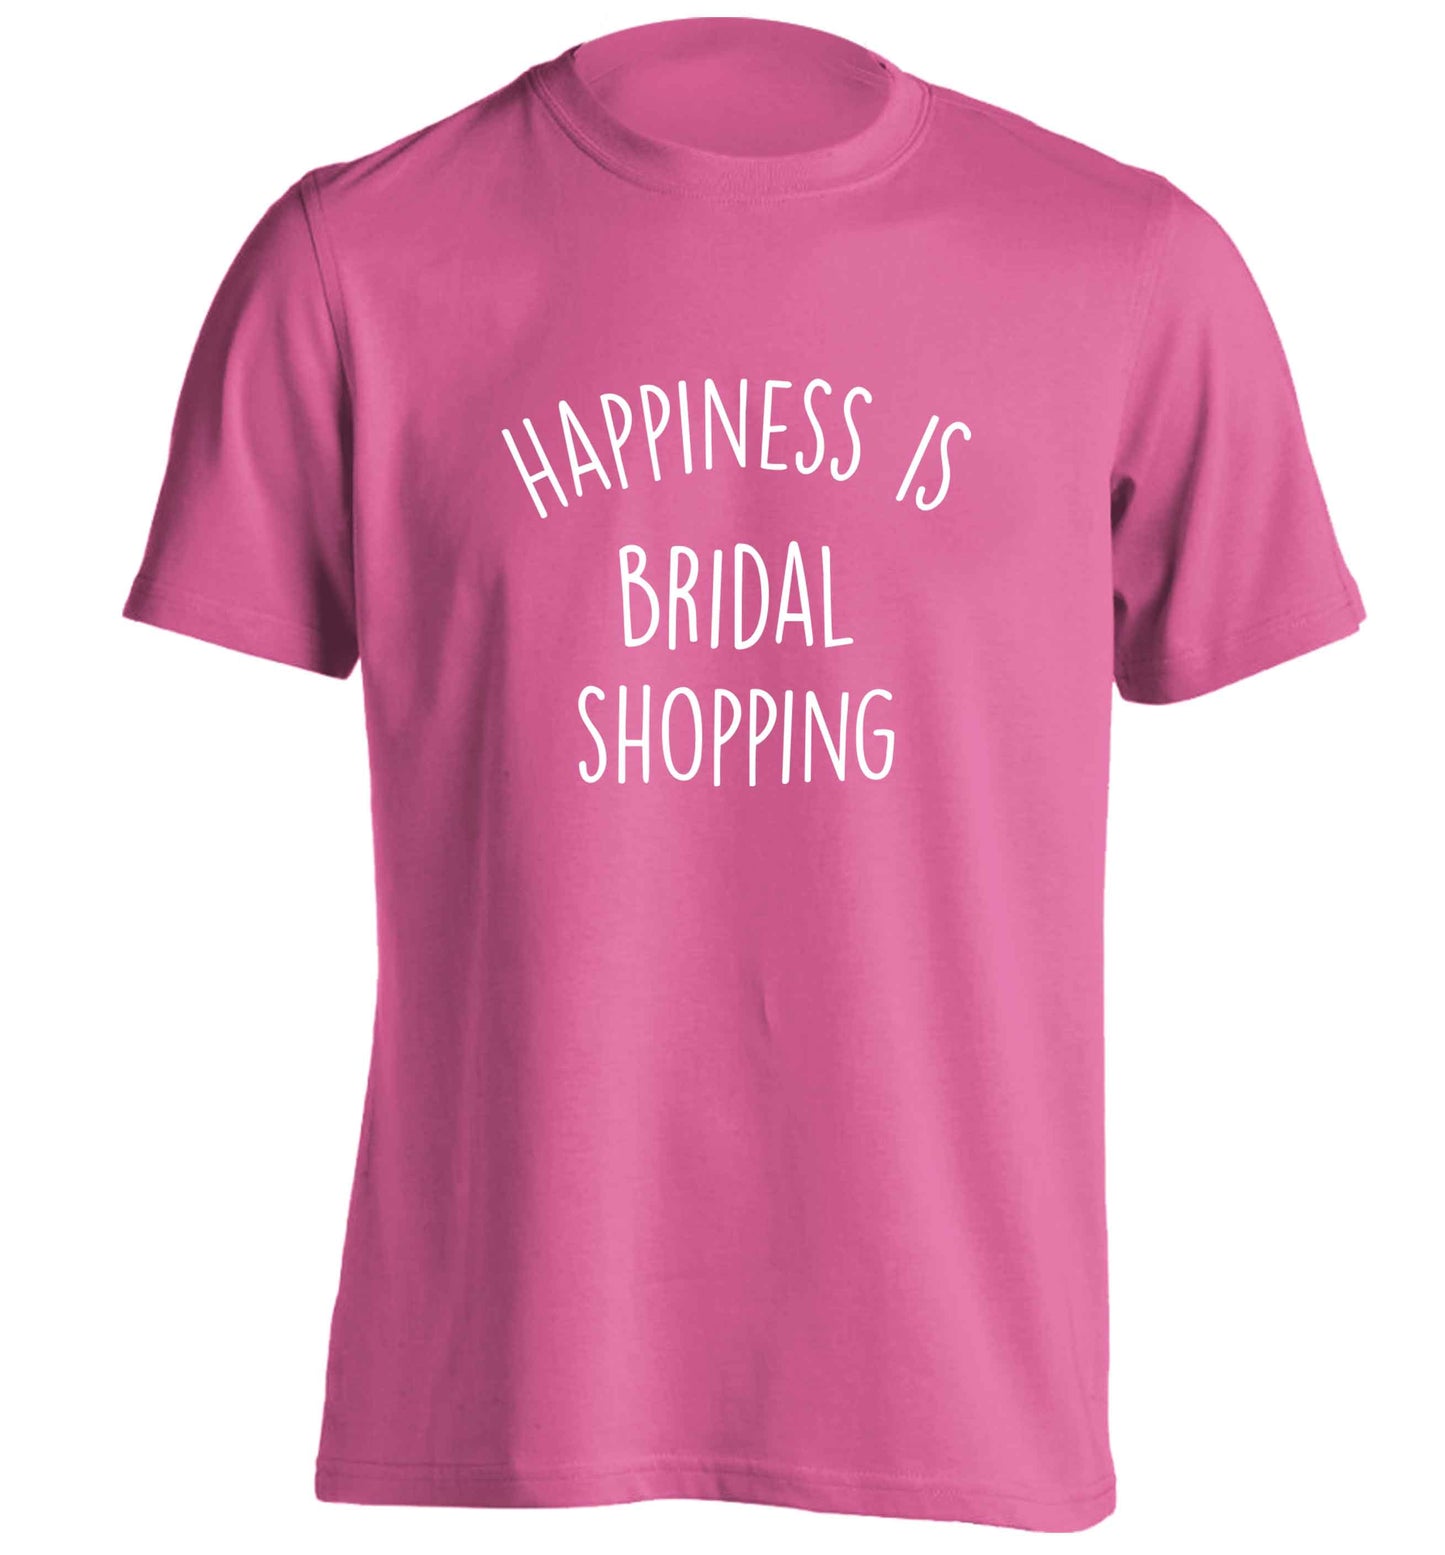 Happiness is bridal shopping adults unisex pink Tshirt 2XL